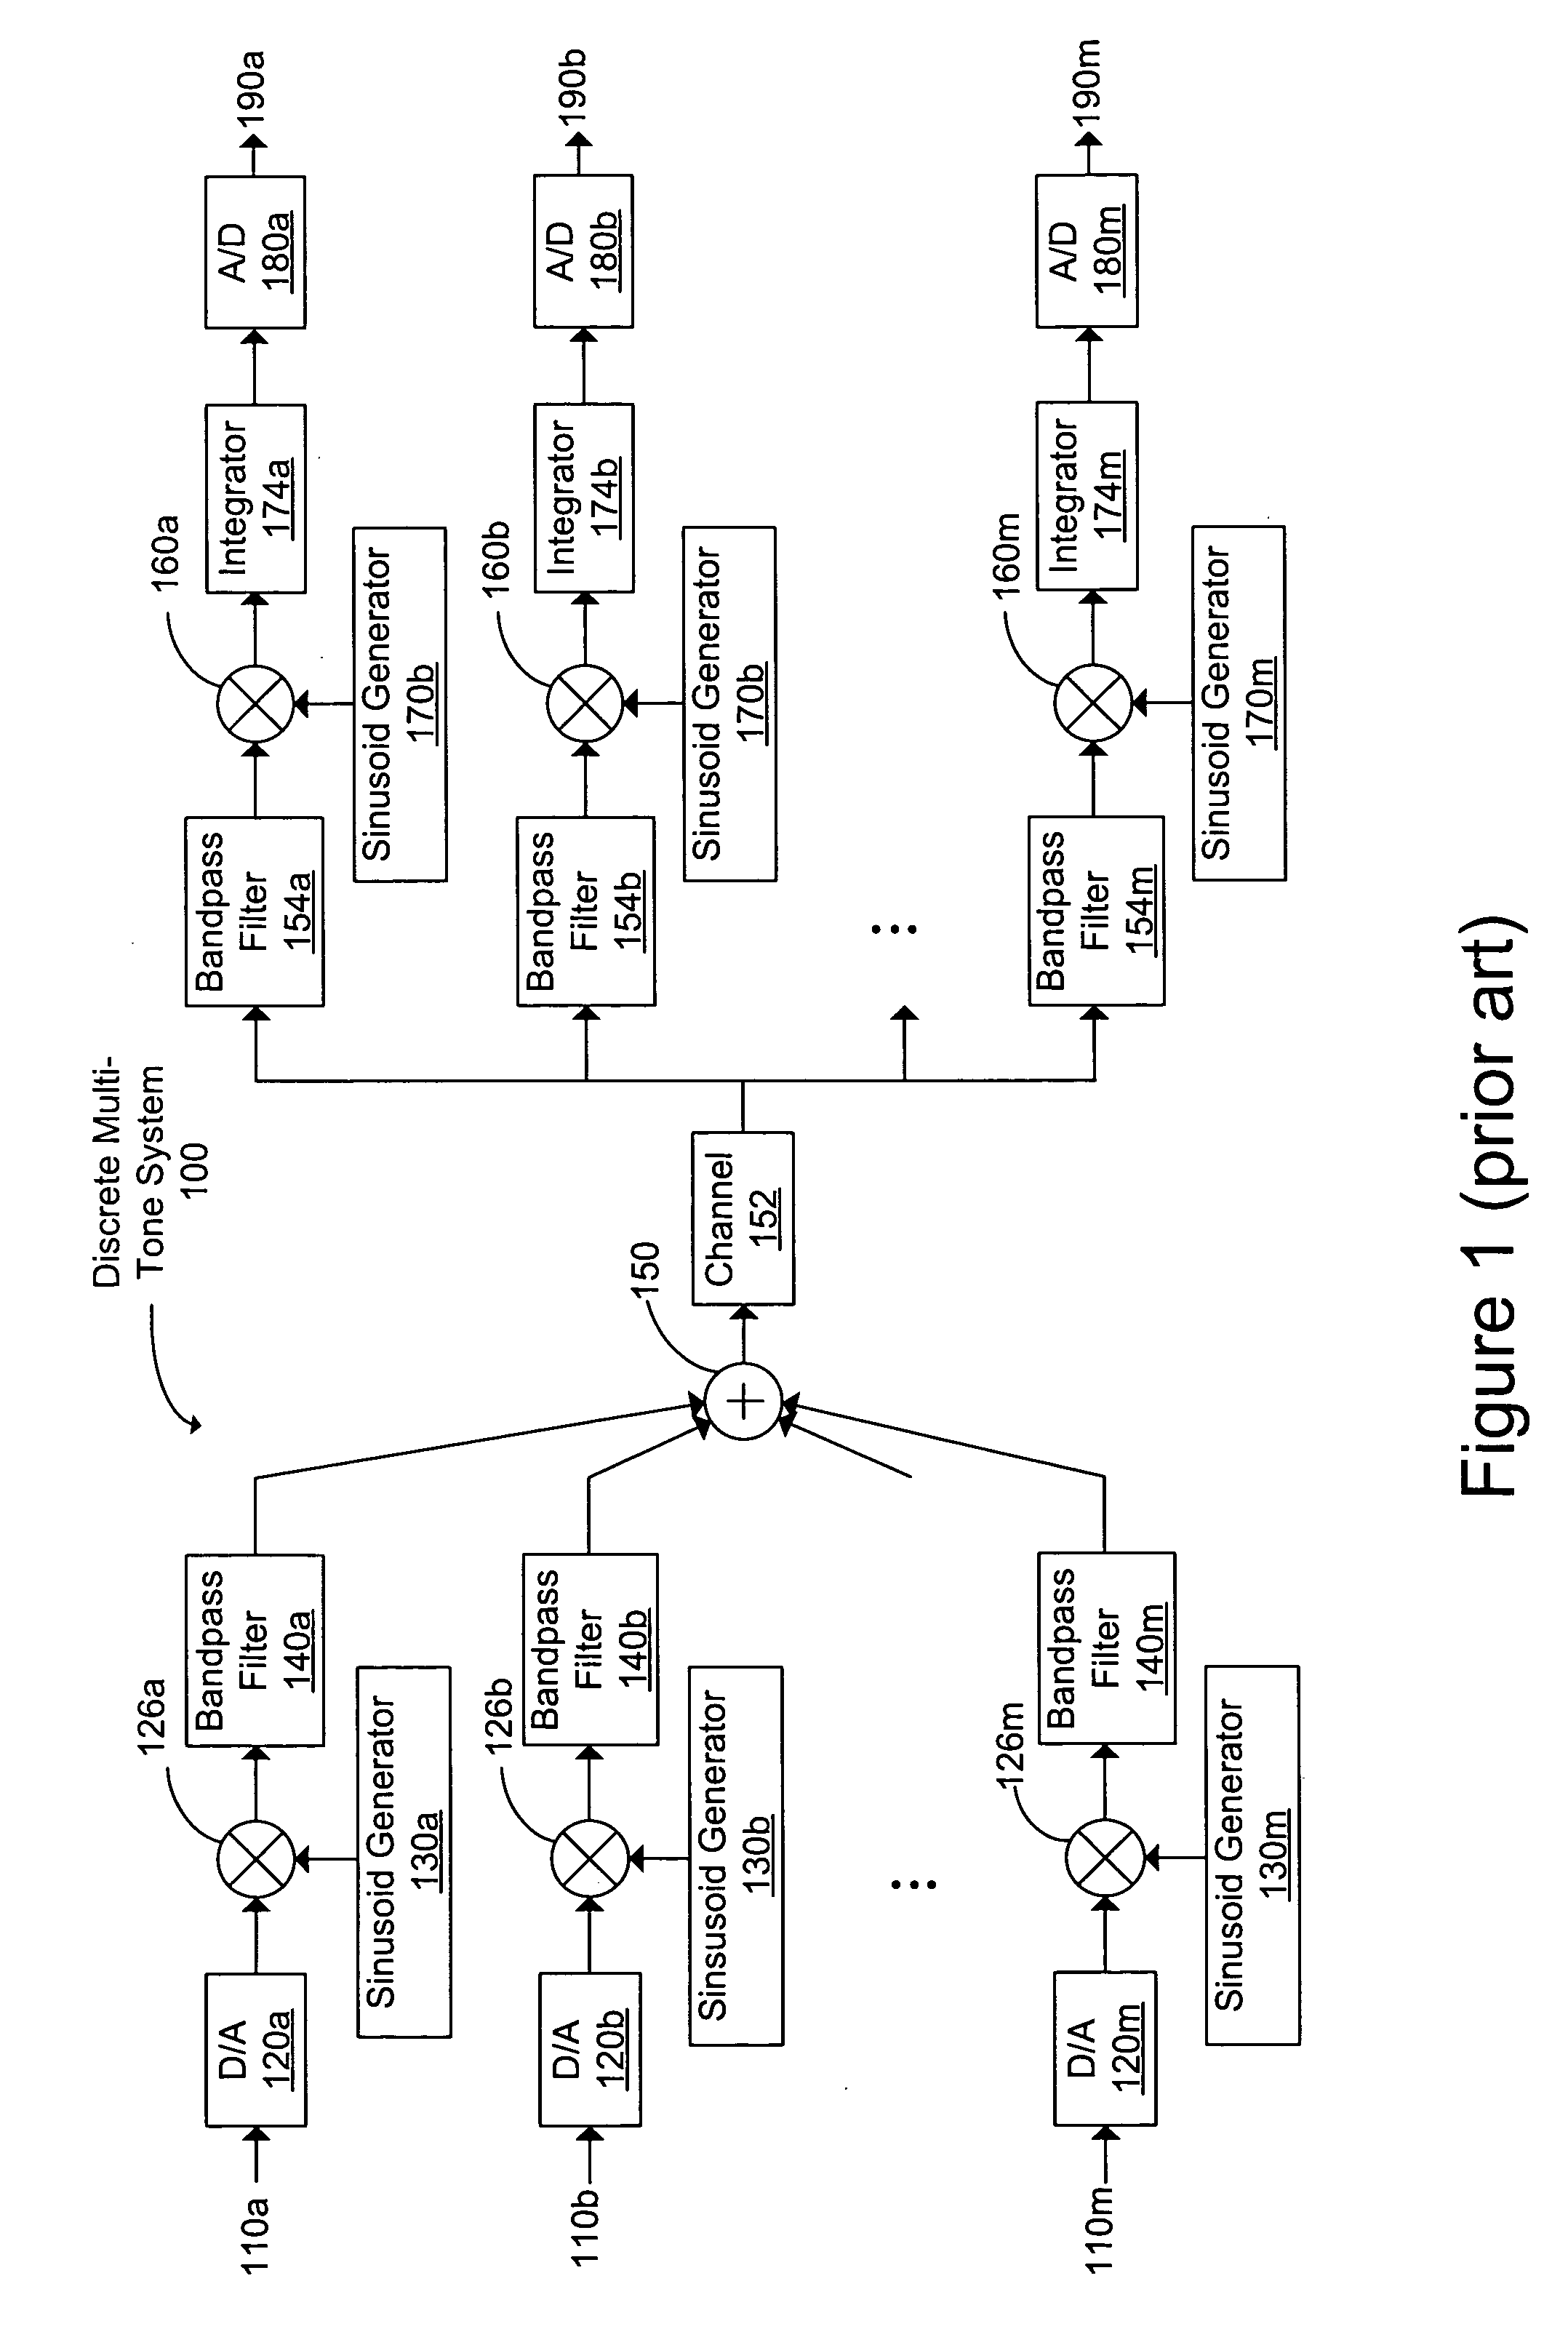 Approximate bit-loading for data transmission over frequency-selective channels